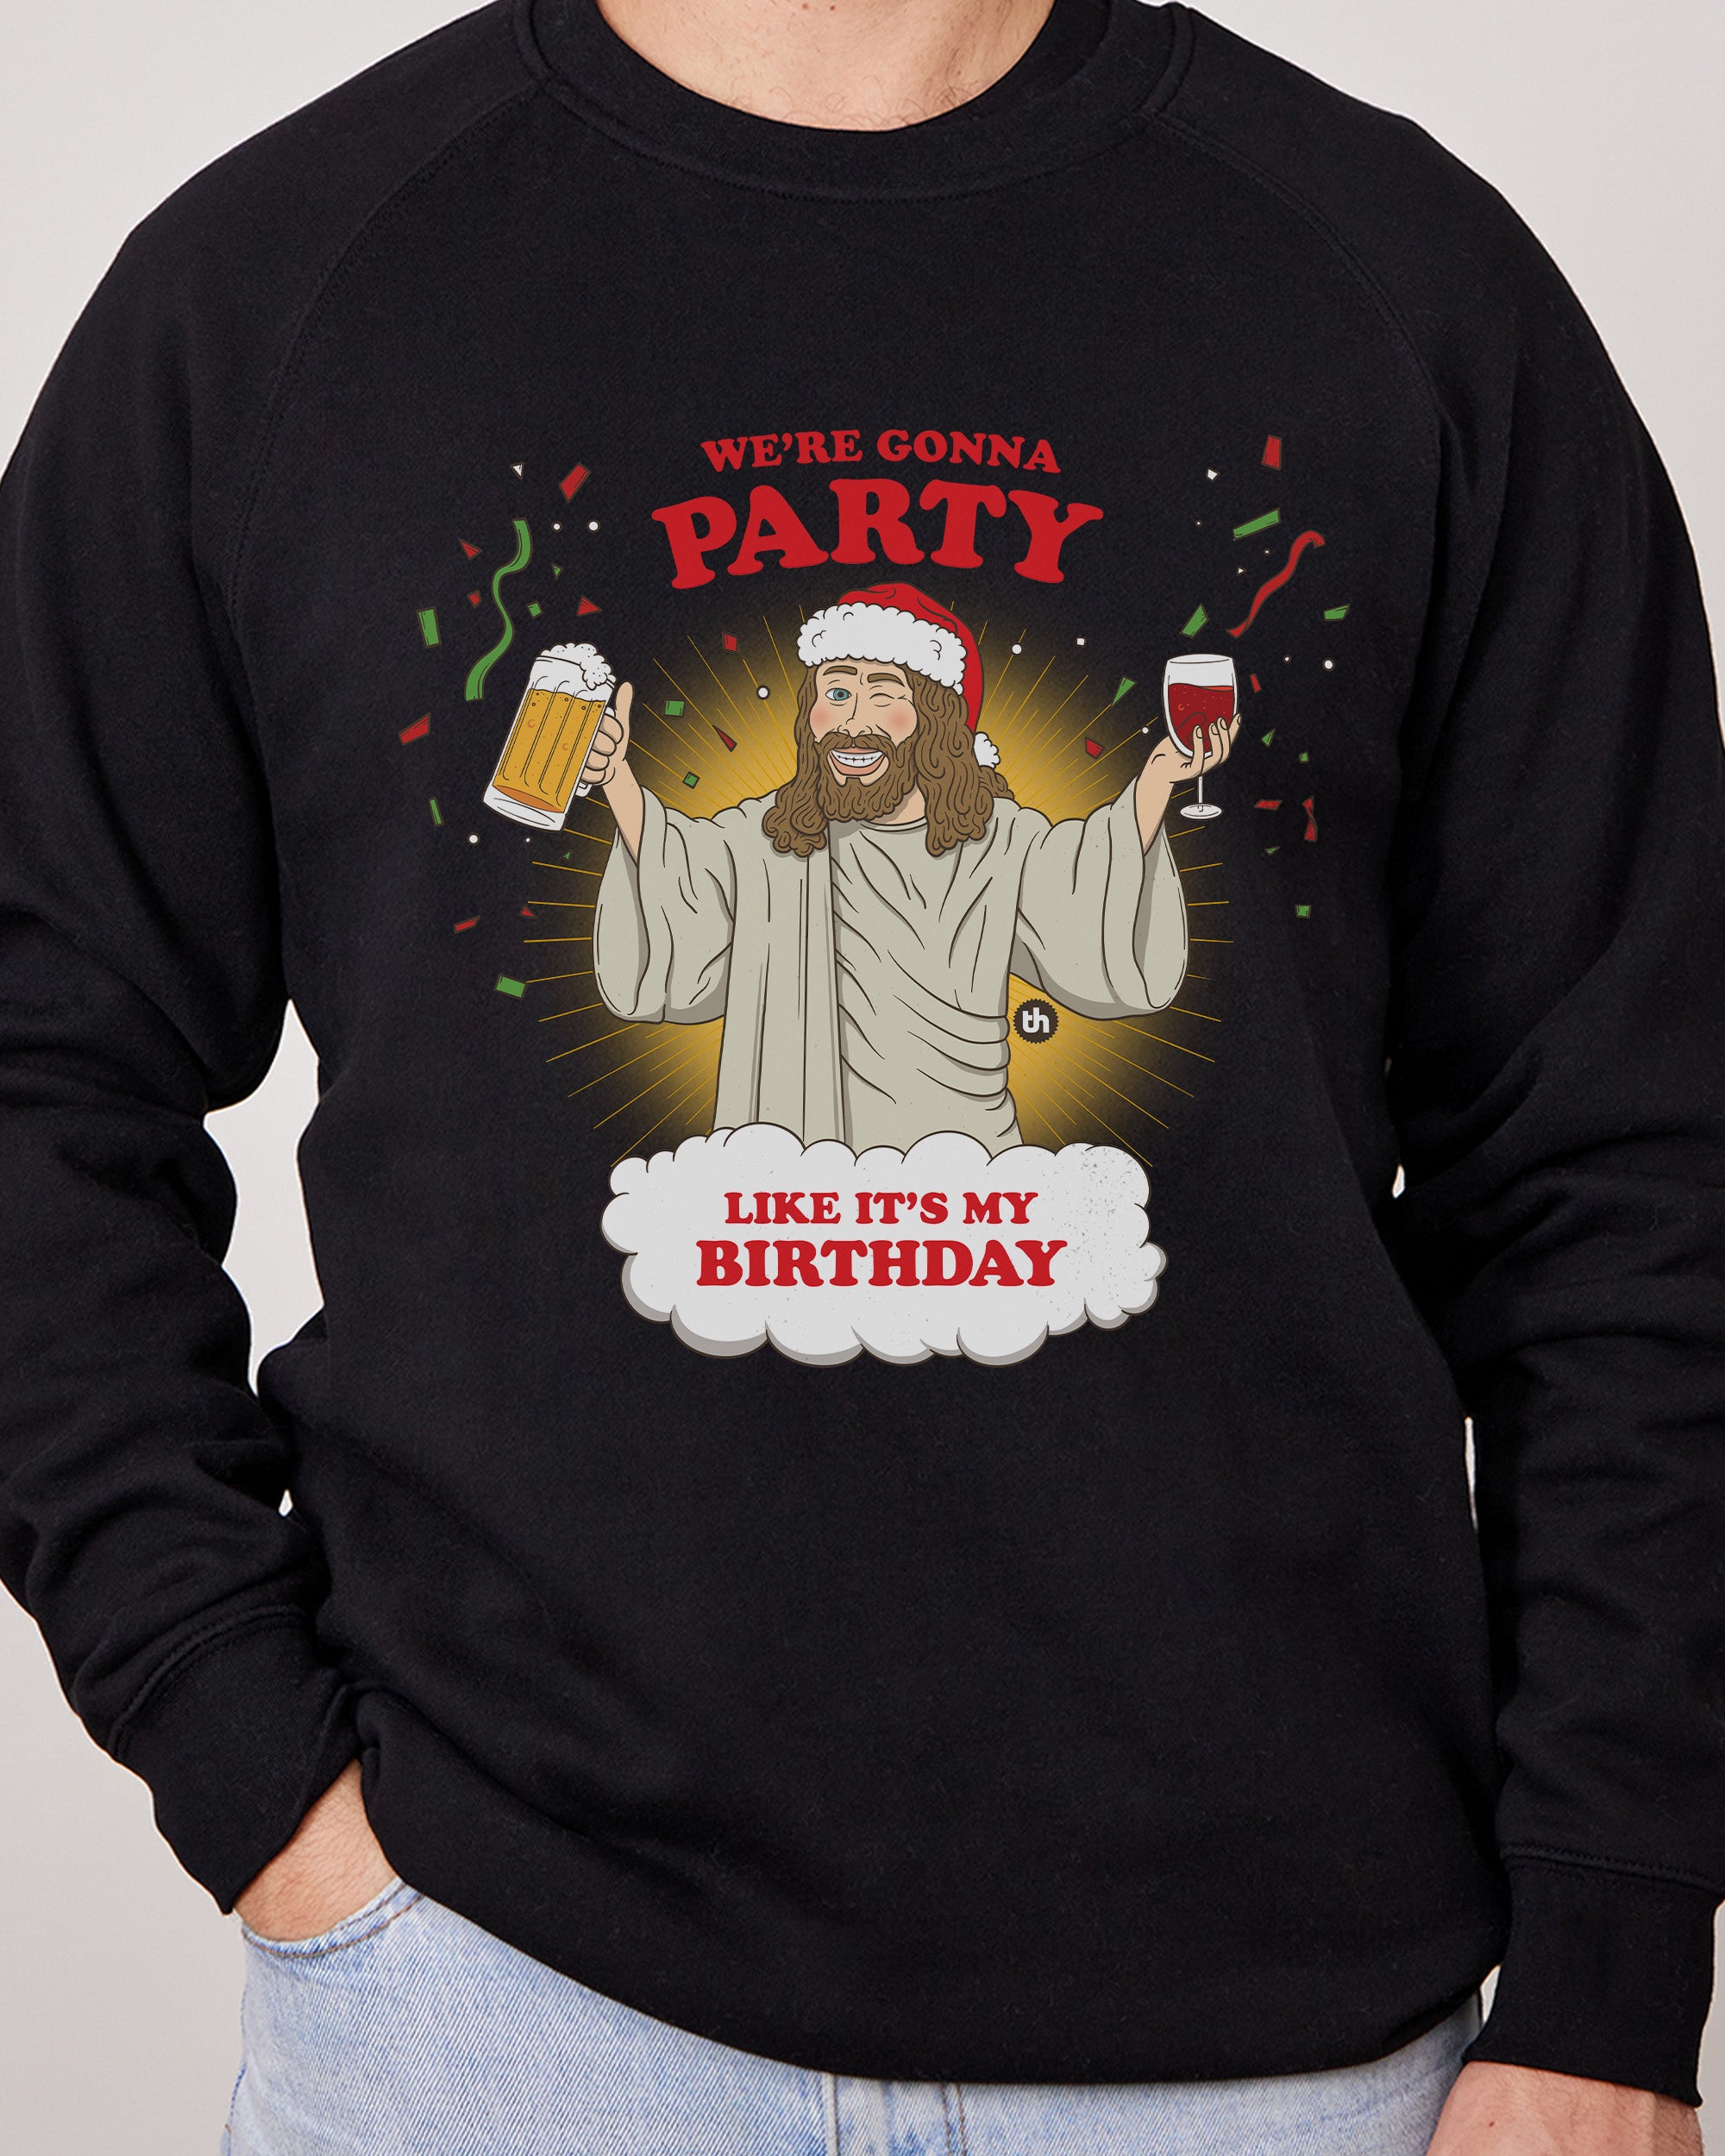 We're Going to Party Like It's My Birthday Jumper